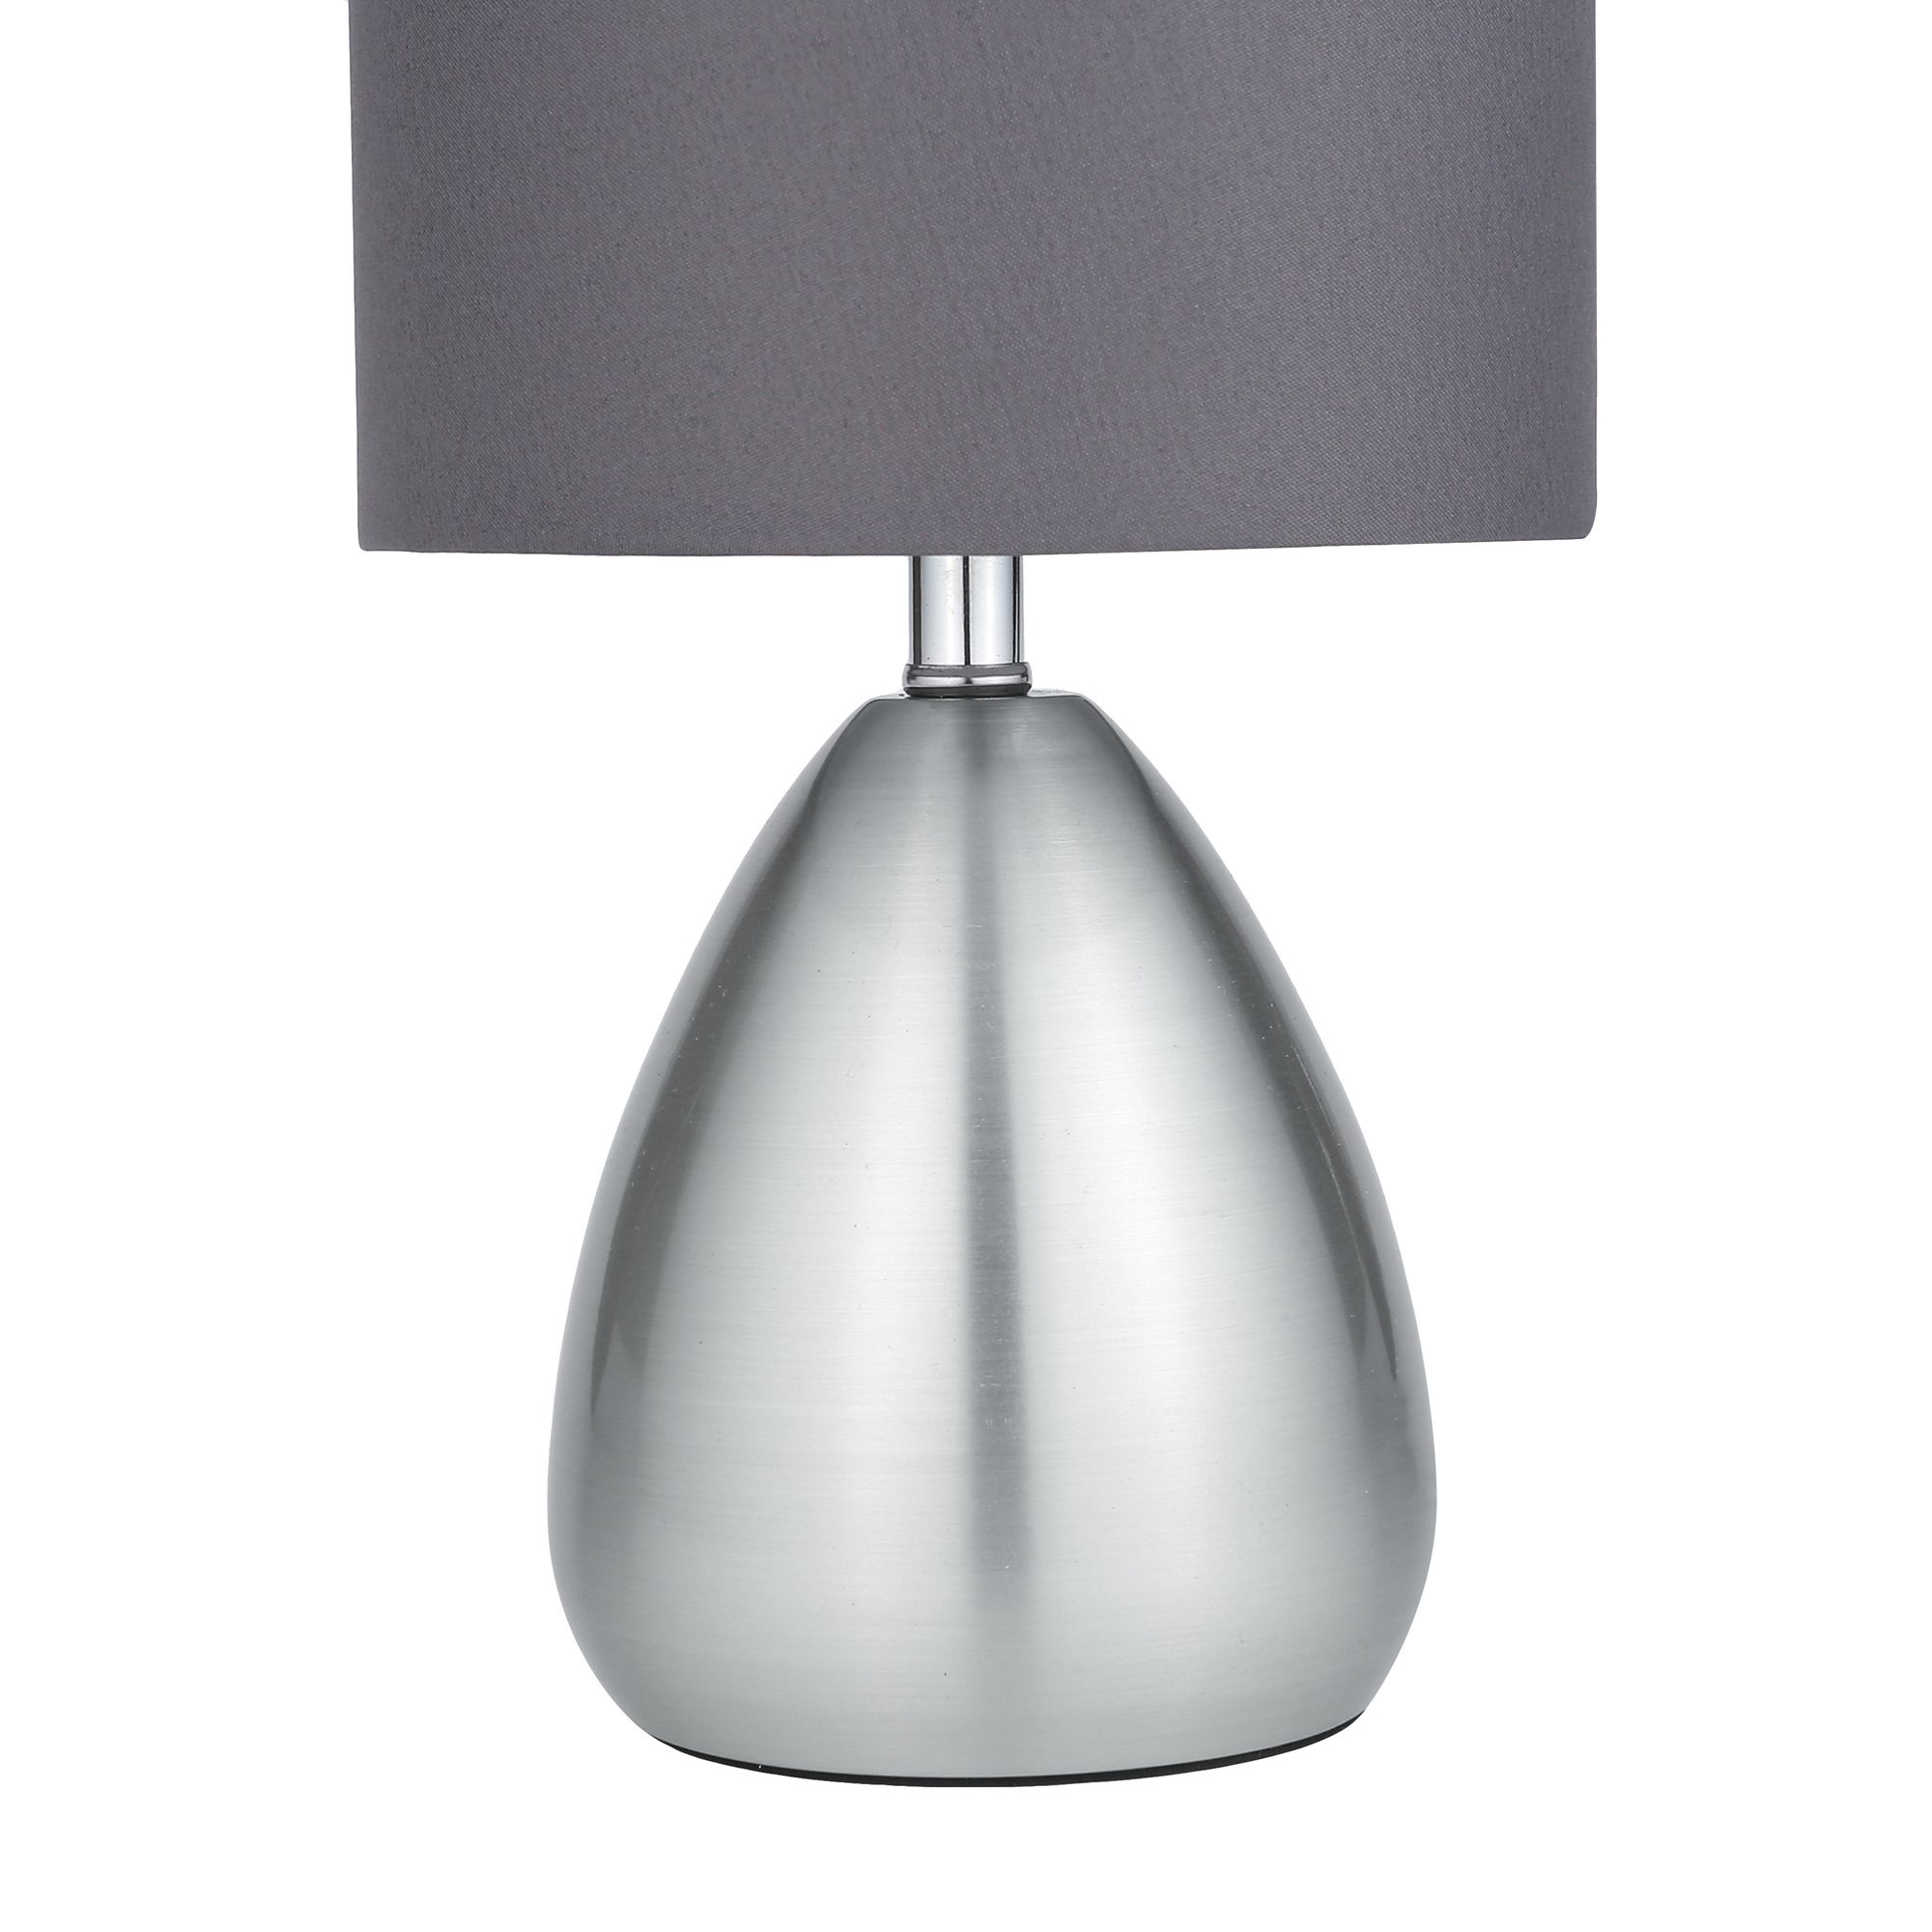 Classic Brushed Satin Grey Chrome effect Eco halogen Table lamp, Pack of 2